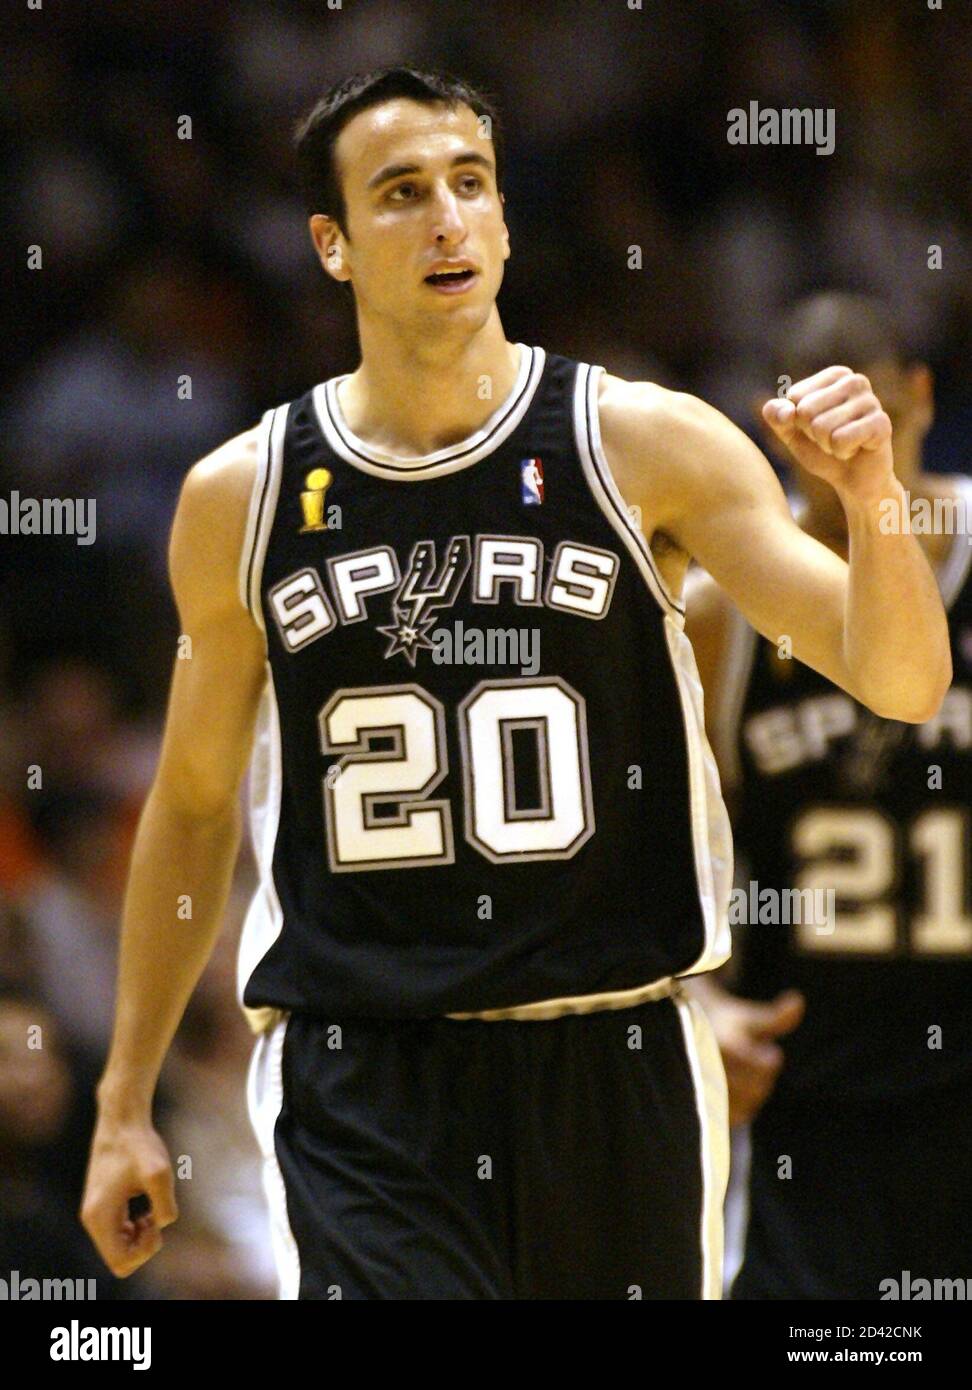 San Antonio Spurs forward Emanuel Ginobili reacts to the Spurs 93-83 win  over the New Jersey Nets in Game 5 of the NBA Finals in East Rutherford,  New Jersey, June 13, 2003.